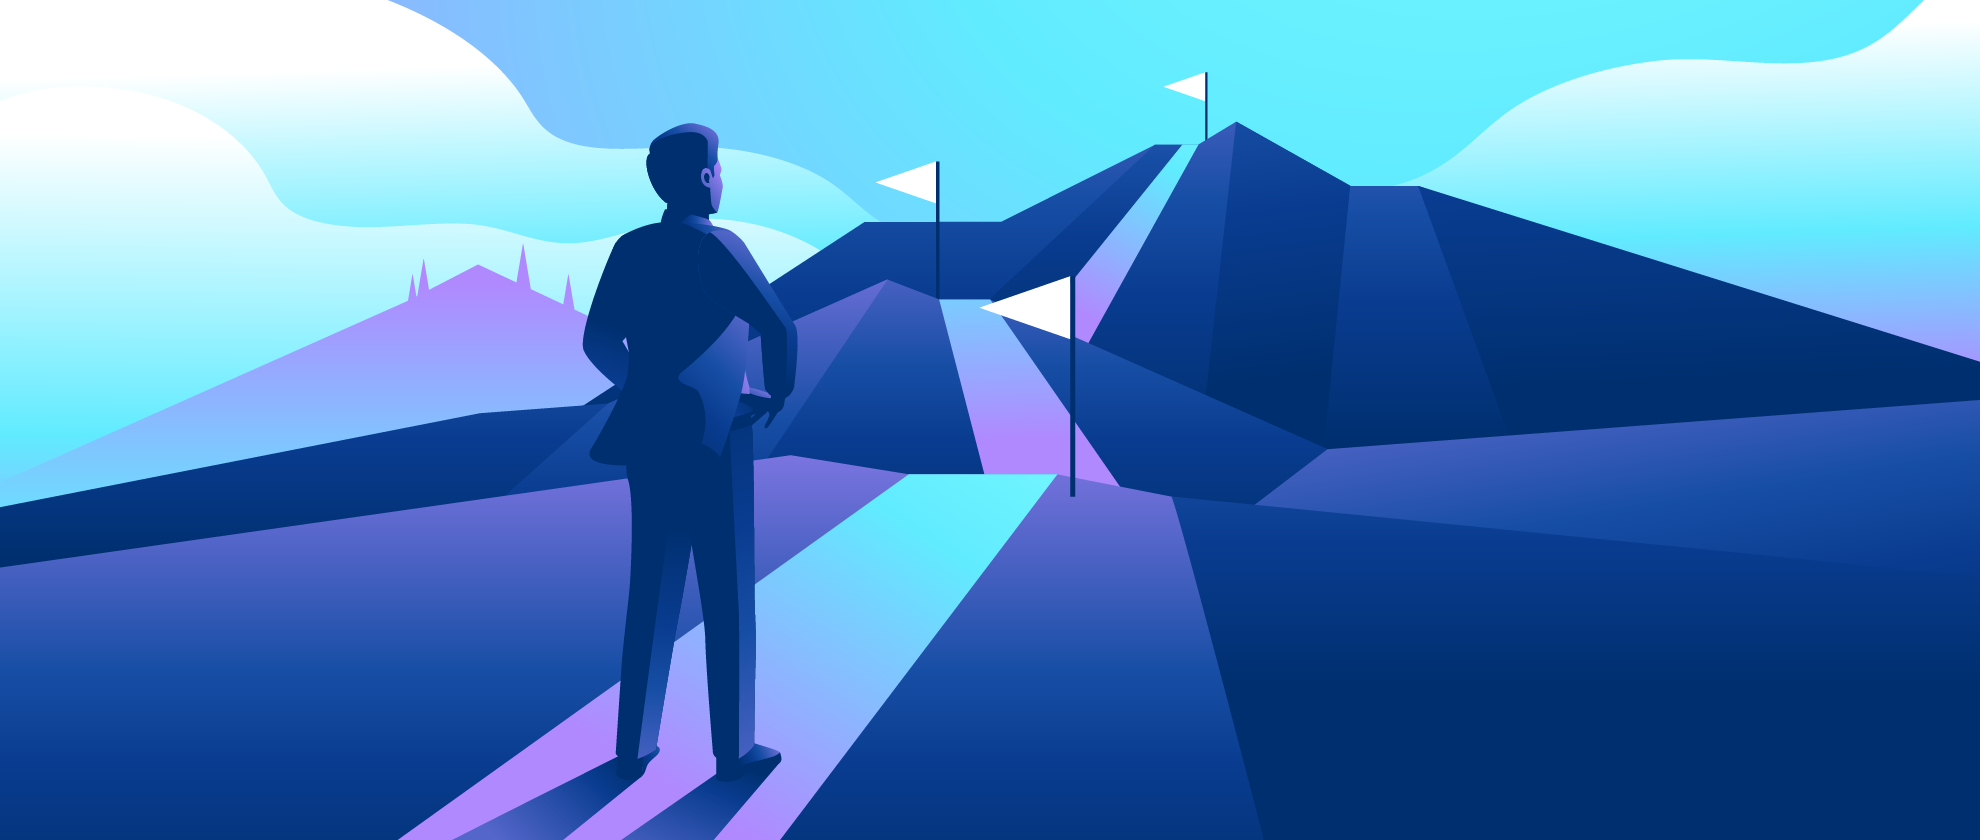 A man in office attire looks into the horizon where a stylized mountain range represents the challenges of remote work.  A clear path with flags along its path represents the possibility of step-wise success.